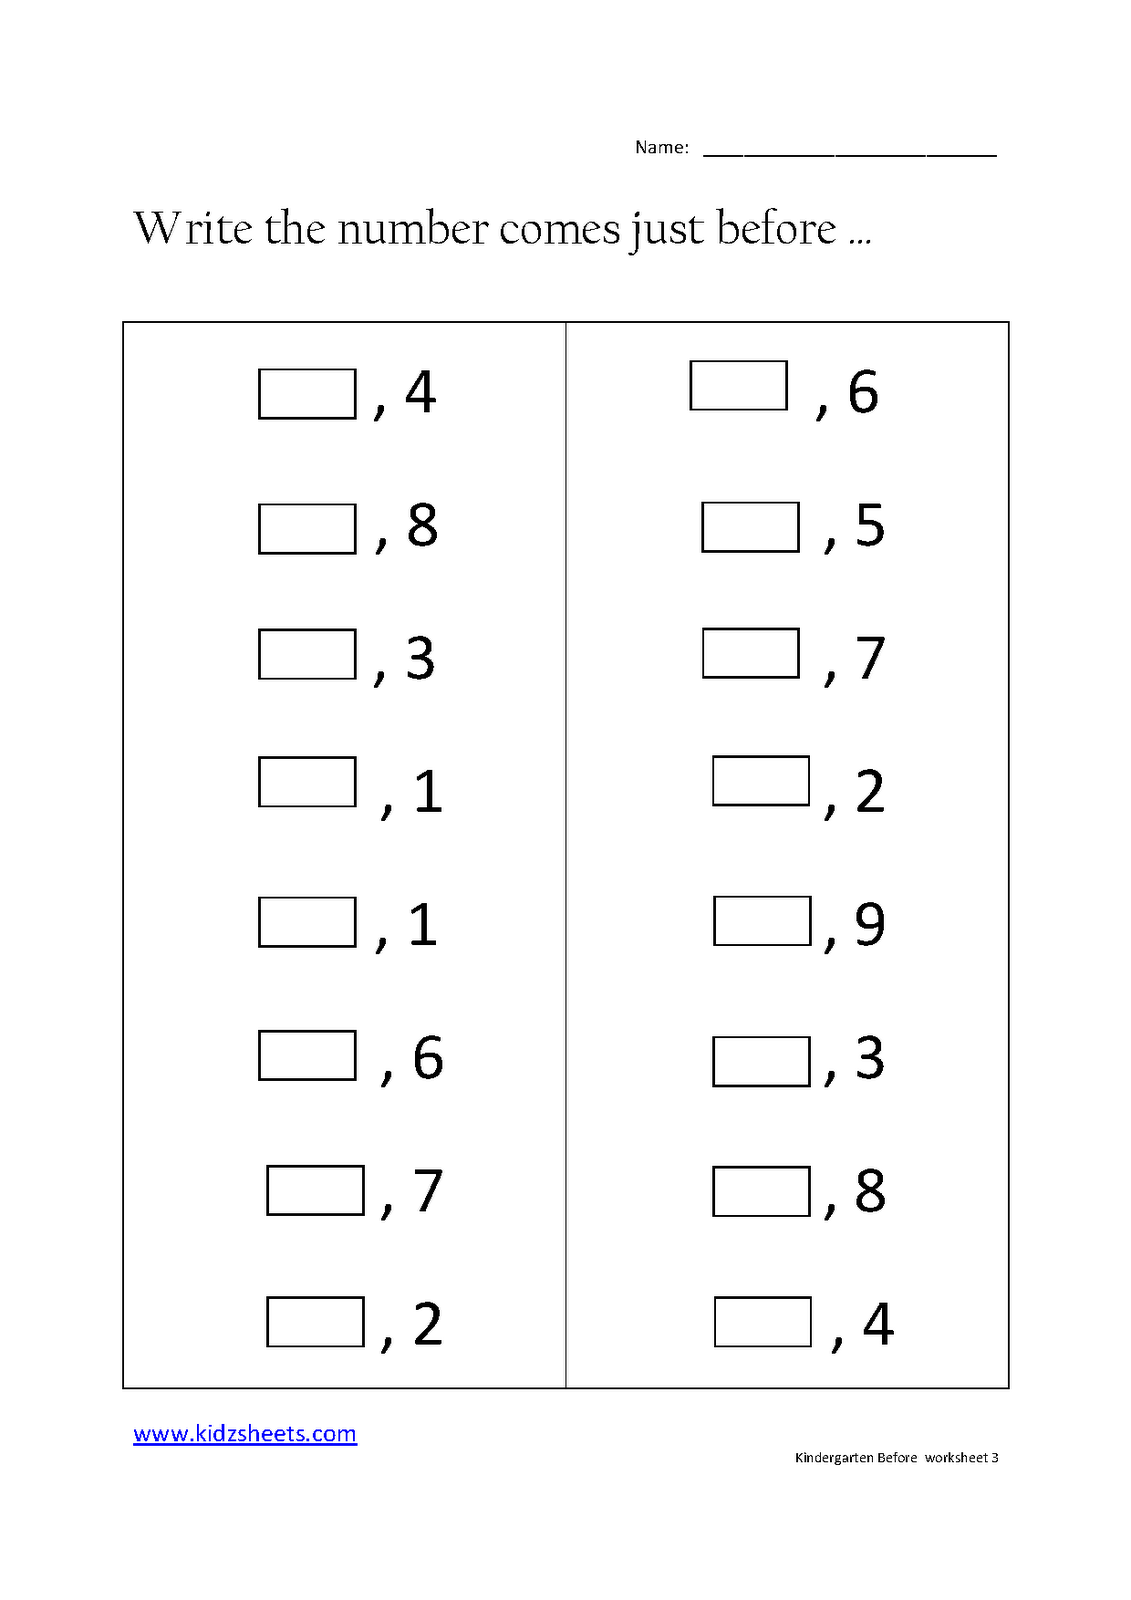 14 Best Images of Before And After Numbers 1 100 Worksheets - Numbers